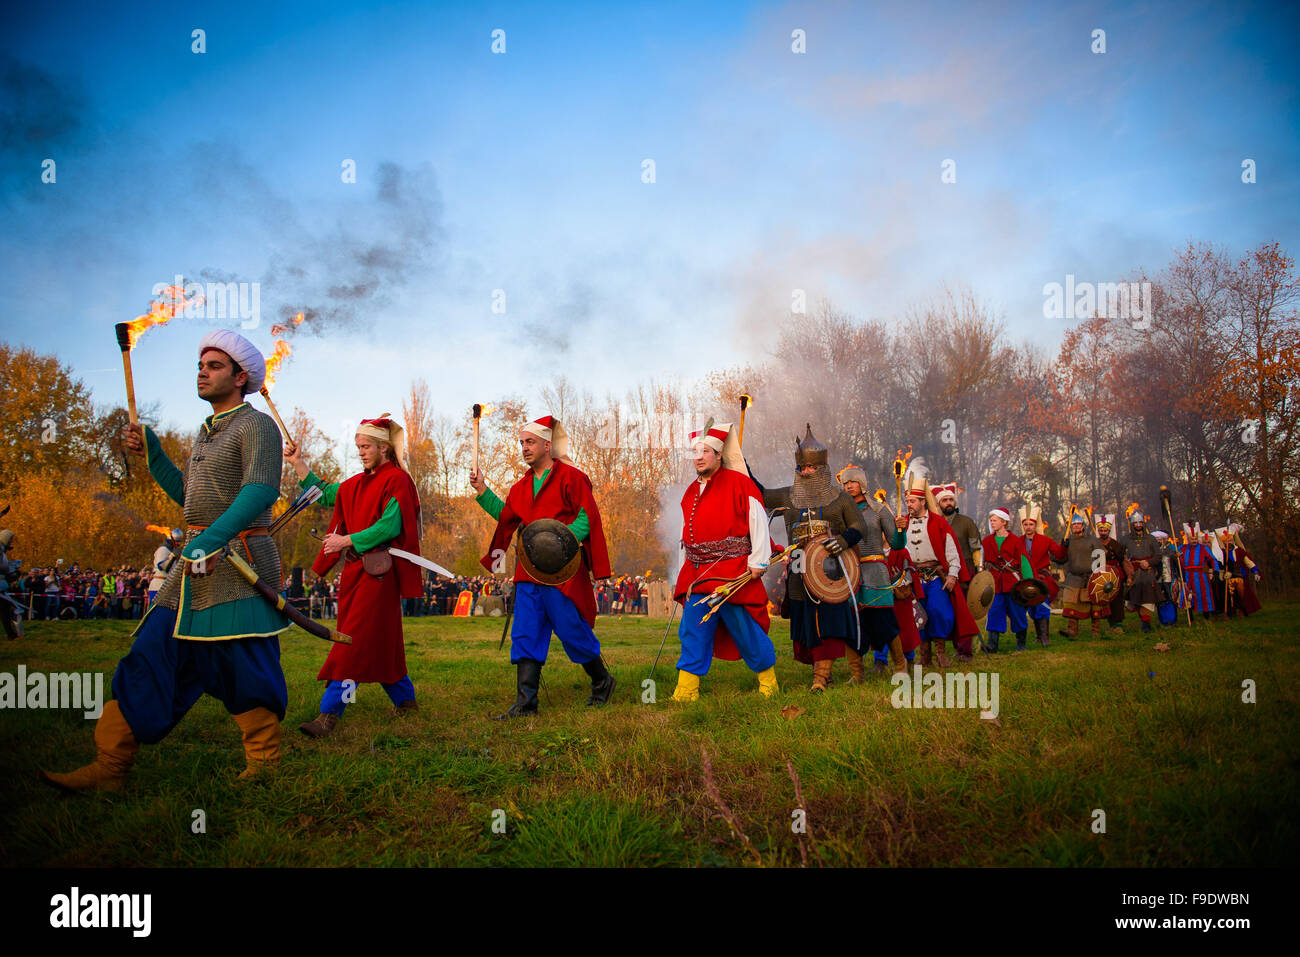 Actors from all around the world take part in a reenactment of the battle of Polish King Wladyslaw III Warnenczyk against Ottoman Turks 571 years ago near the town of Varna, Bulgaria. Wladislav III set out with a small army on a crusade against the Turks, Stock Photo